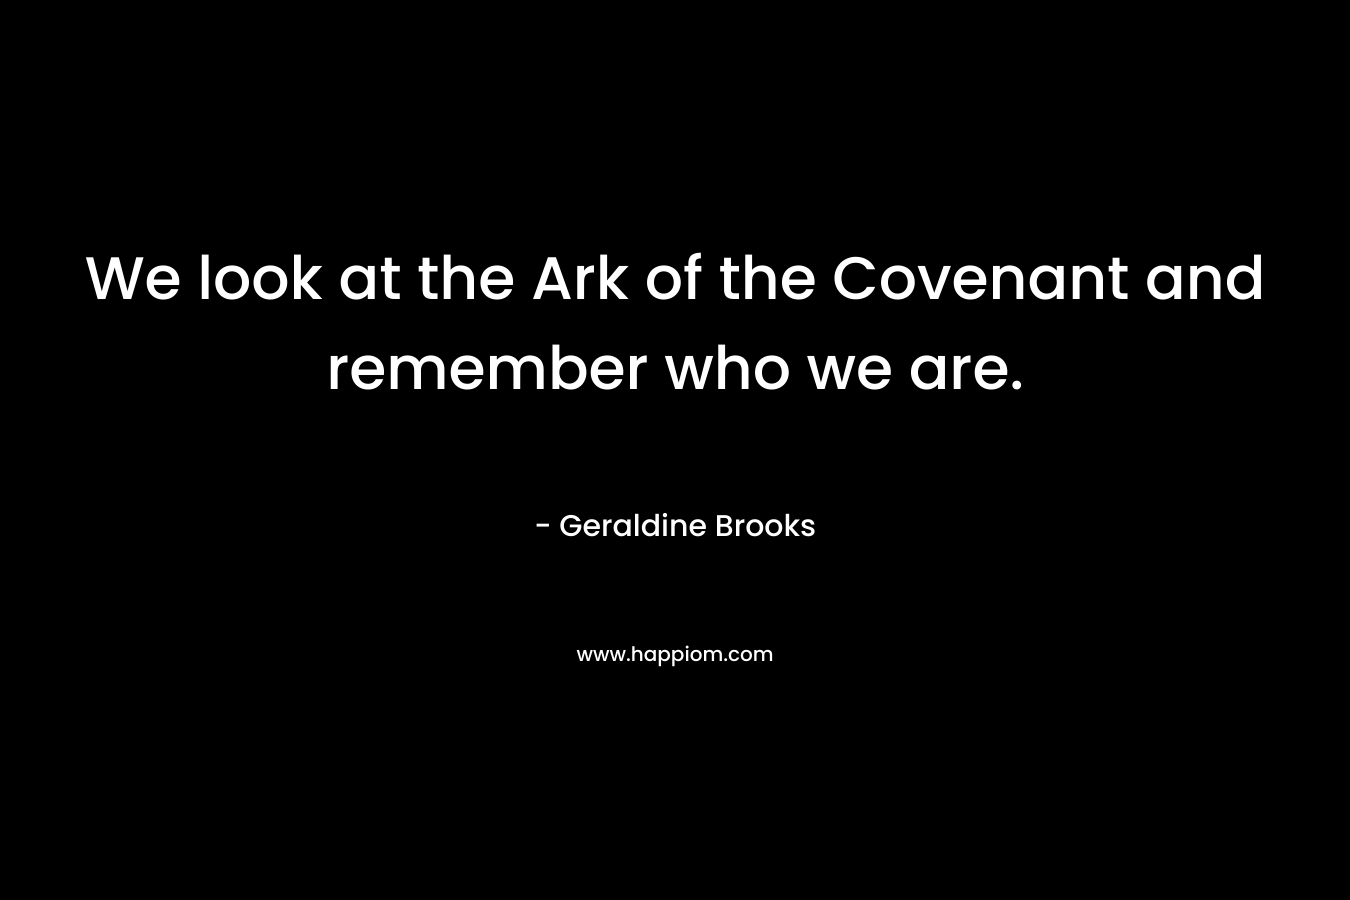 We look at the Ark of the Covenant and remember who we are.